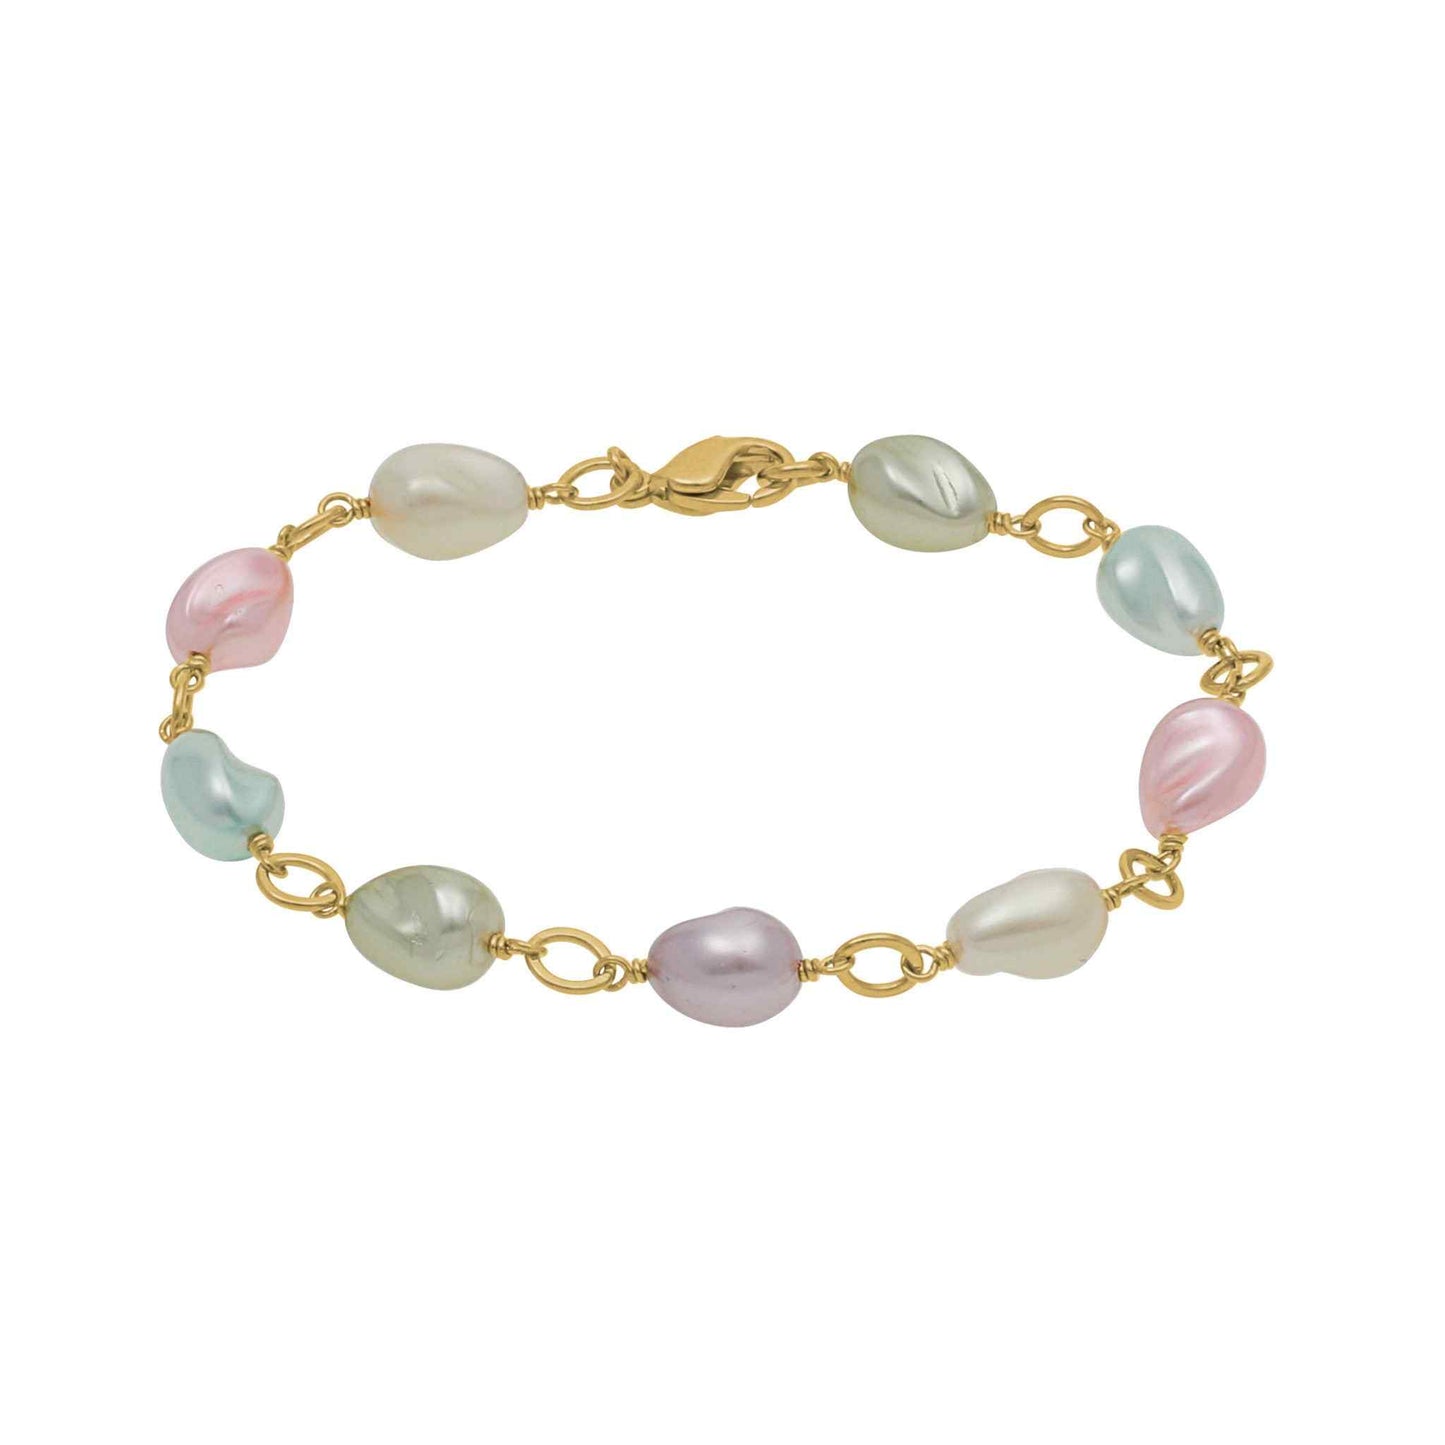 A multicolored tin cup bracelet displayed on a neutral white background.